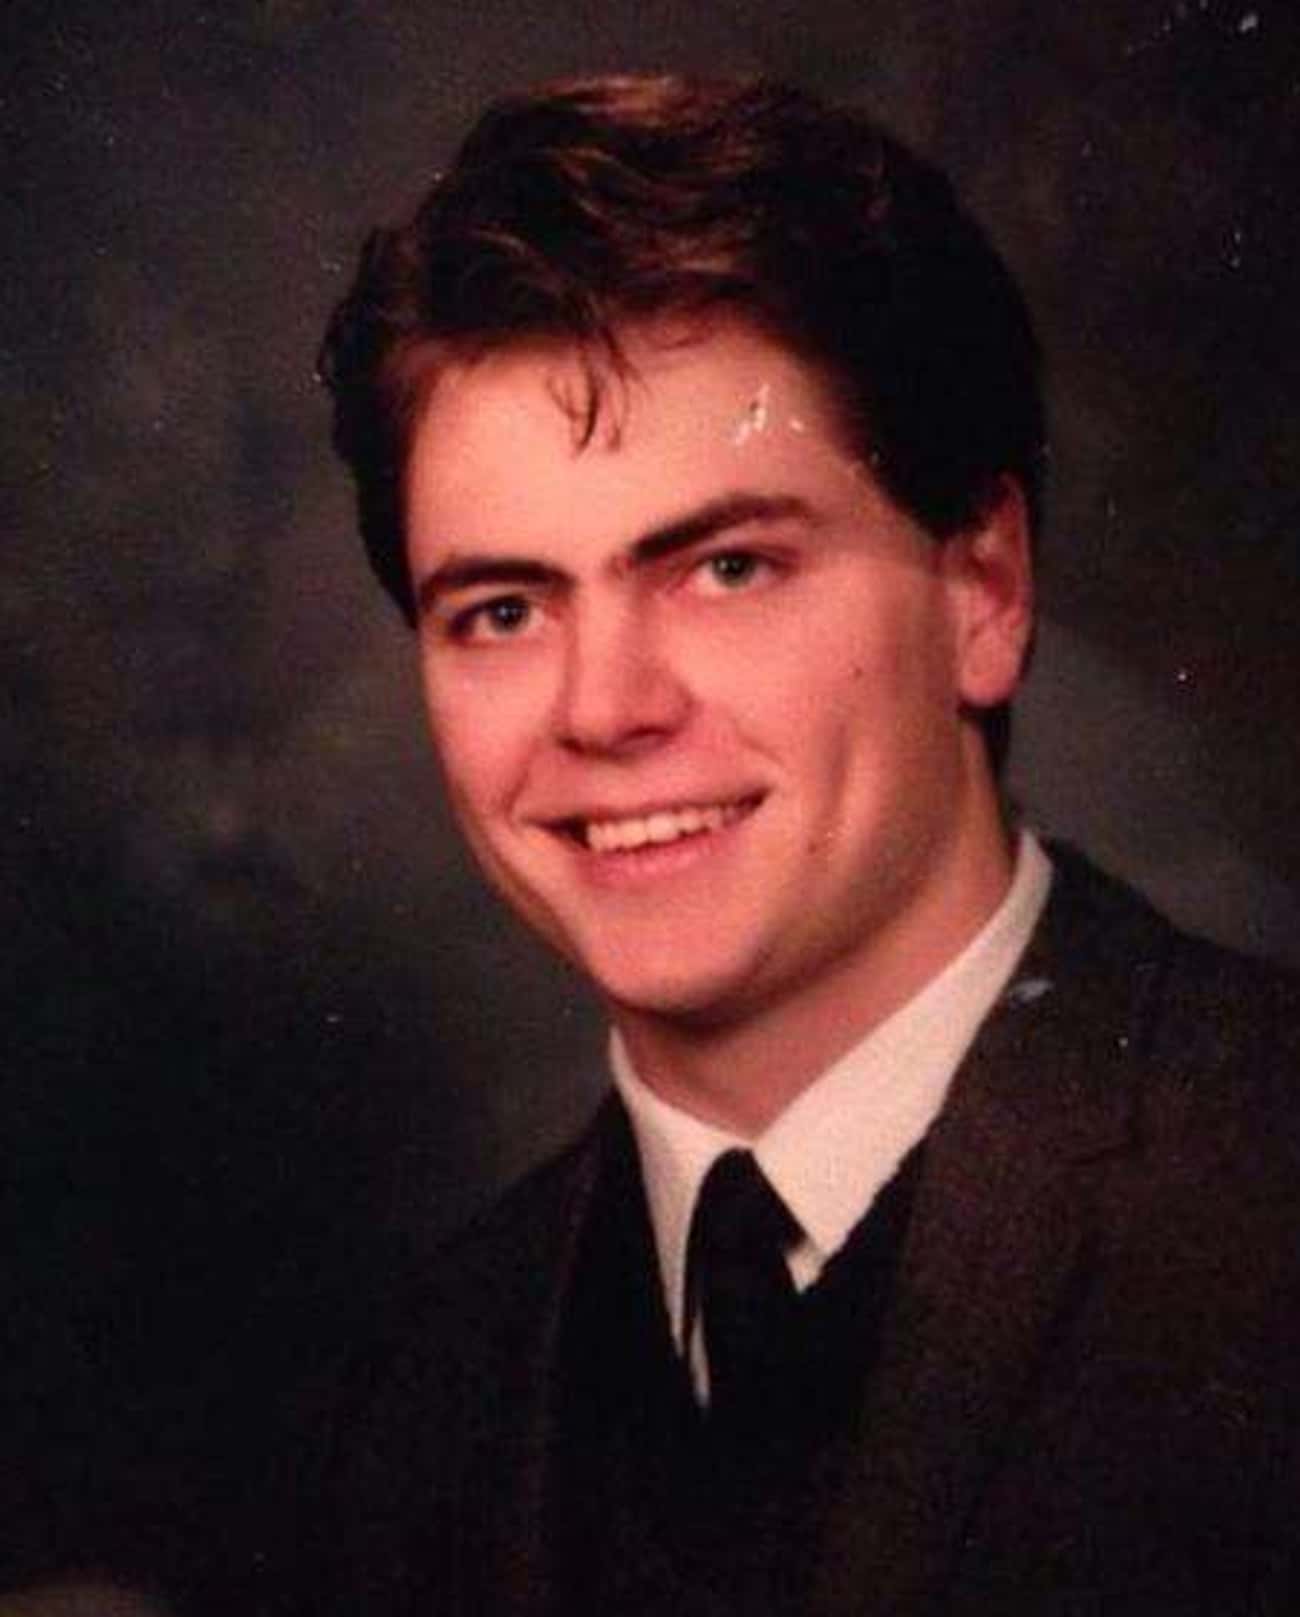 Young Nick Offerman High School Yearbook Photo